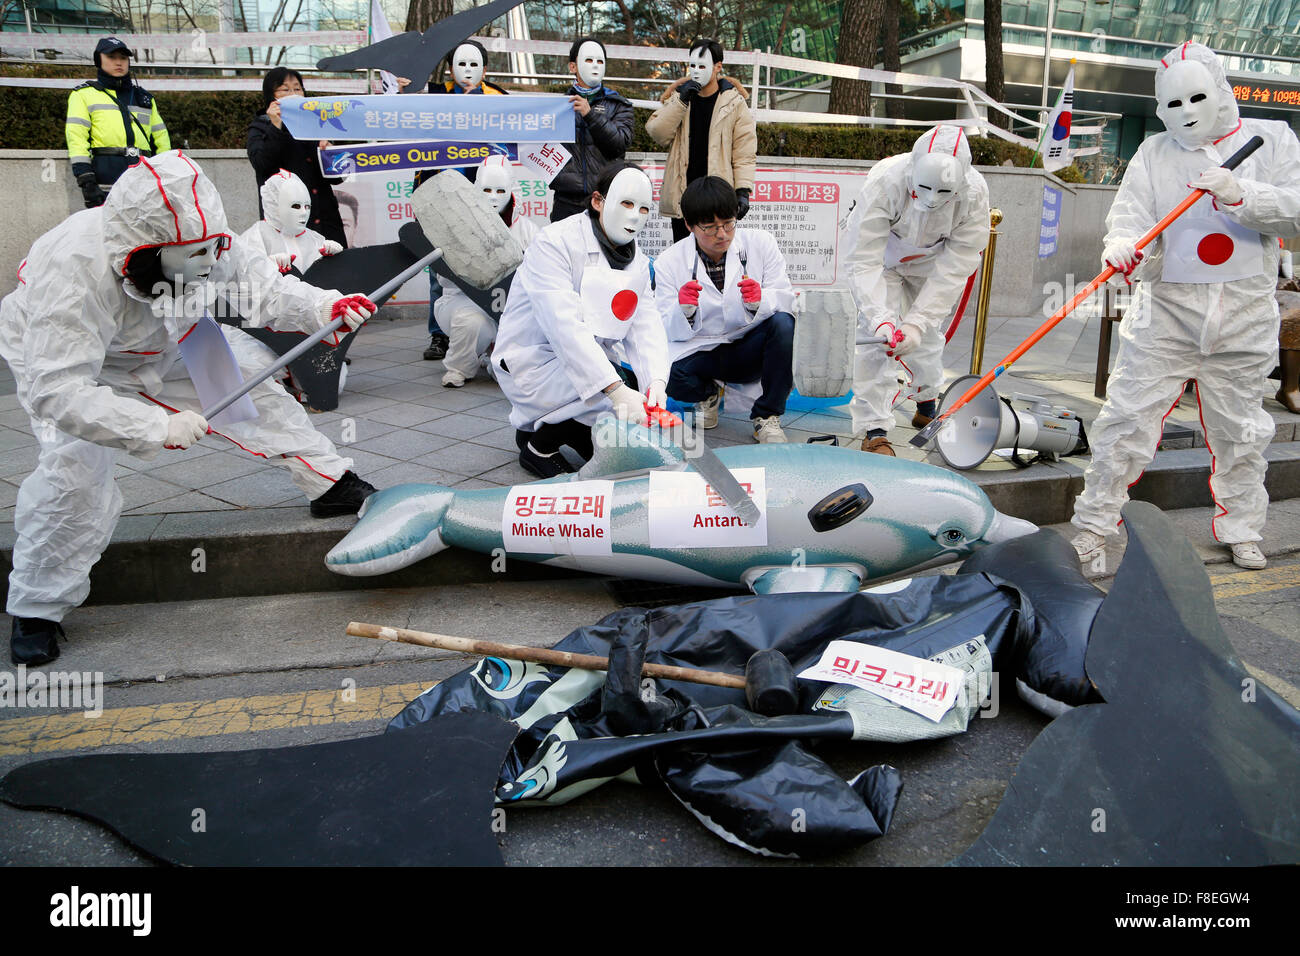 Protest against whaling, Dec 7, 2015 : South Korean environment activists perform during a protest against resumption of Japanese scientists' research whaling in the Antarctic Ocean, near the Japanese Embassy in Seoul, South Korea. © Lee Jae-Won/AFLO/Alamy Live News Stock Photo